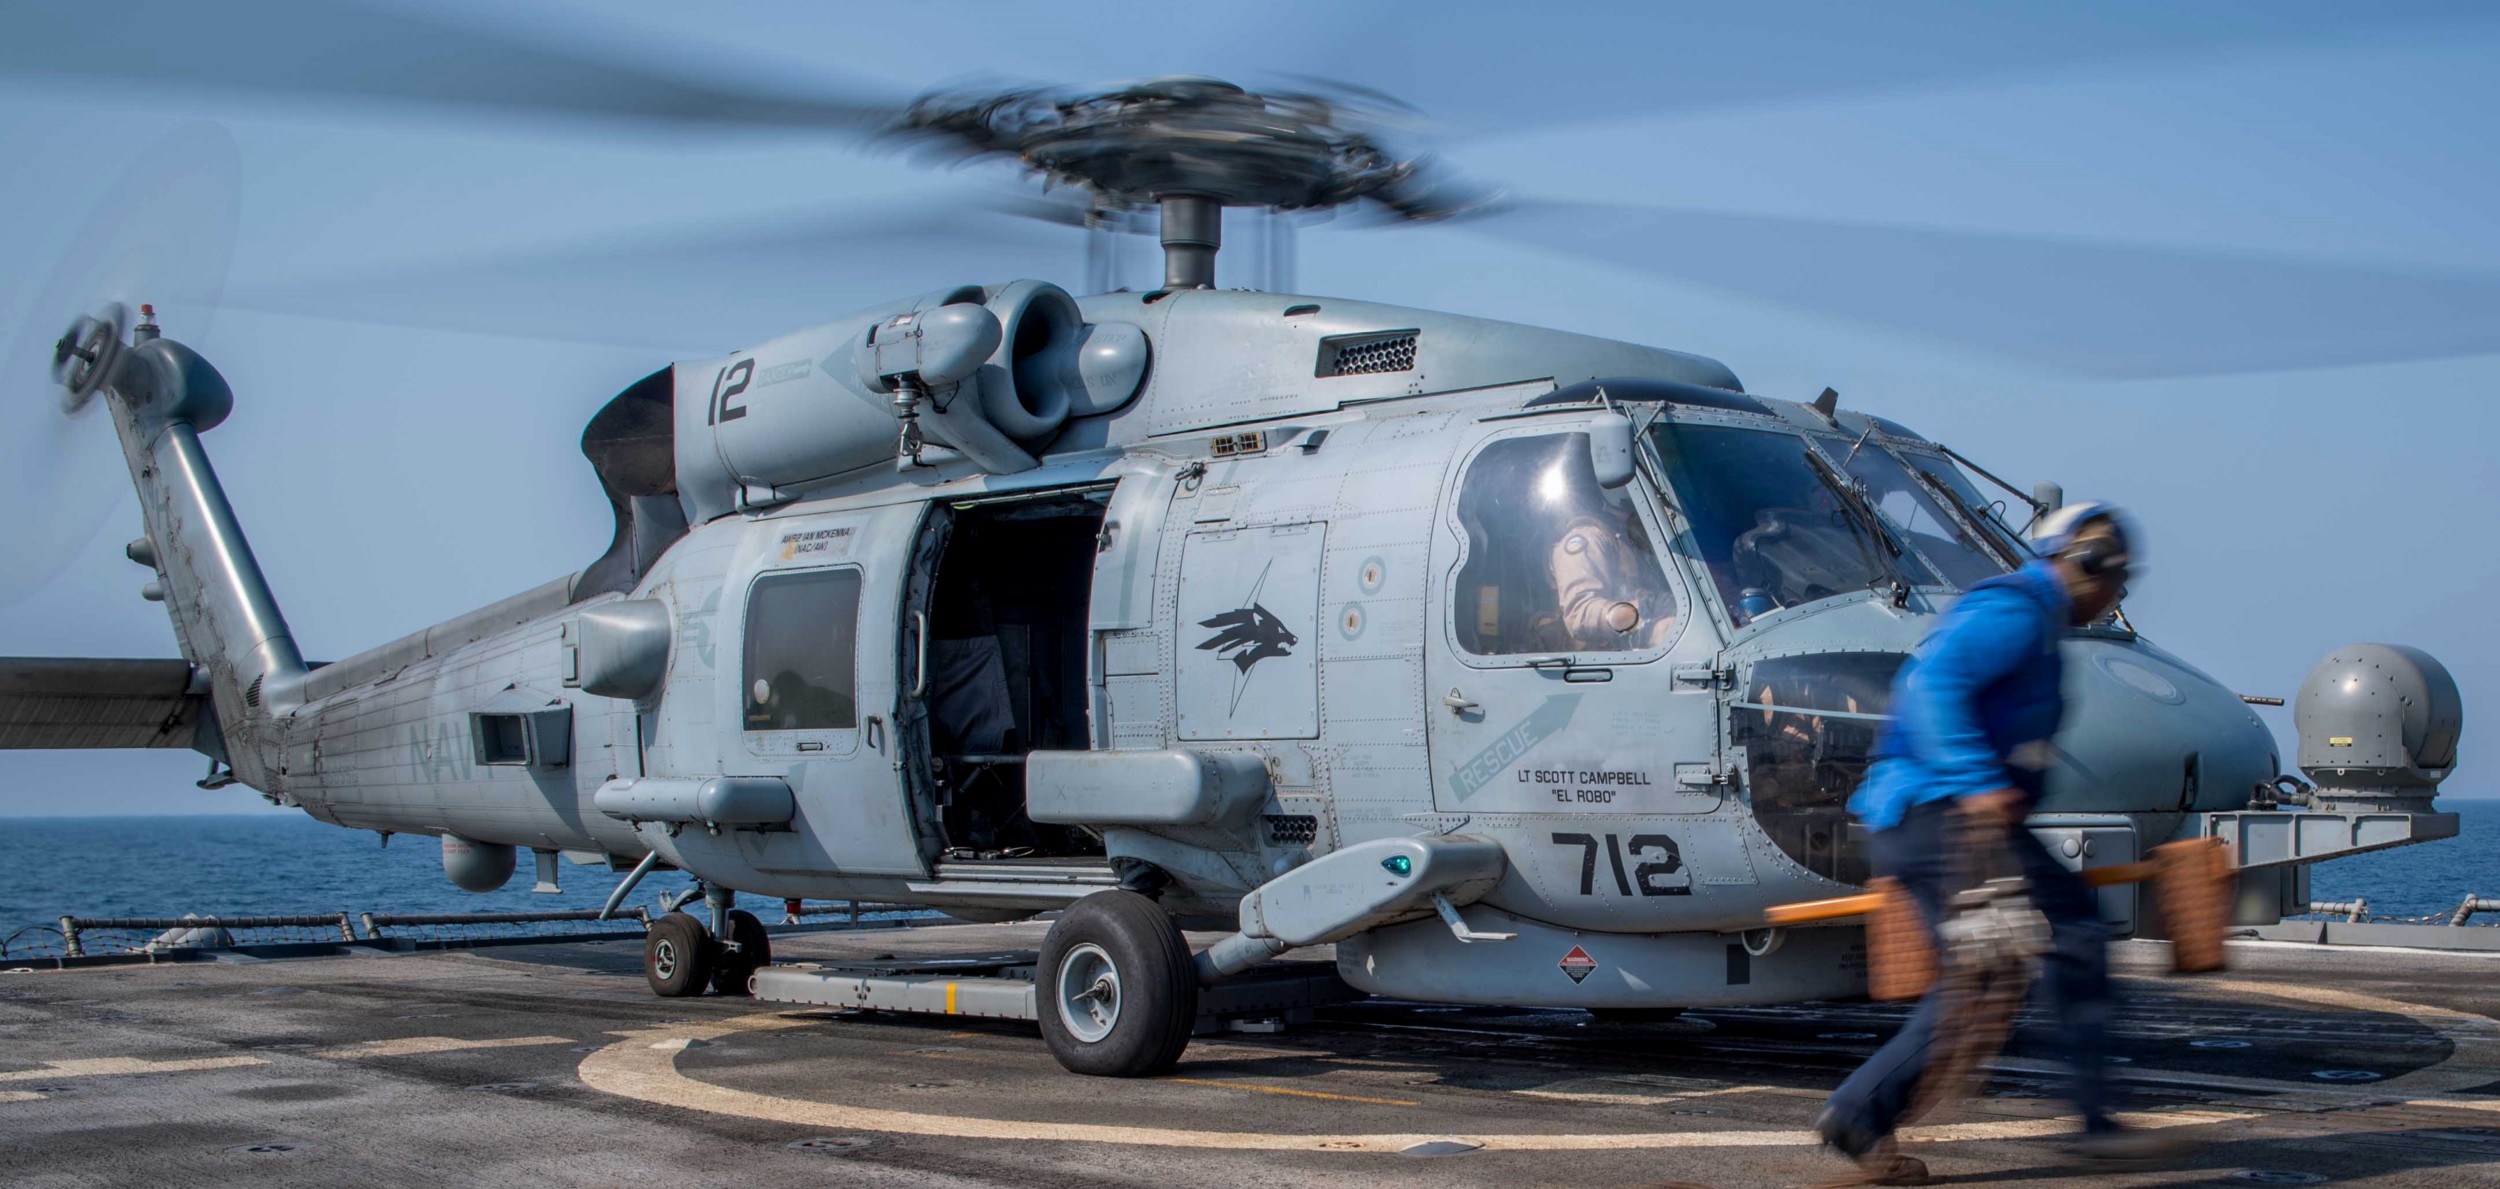 hsm-75 wolf pack helicopter maritime strike squadron mh-60r seahawk cg-59 uss princeton 2017 05